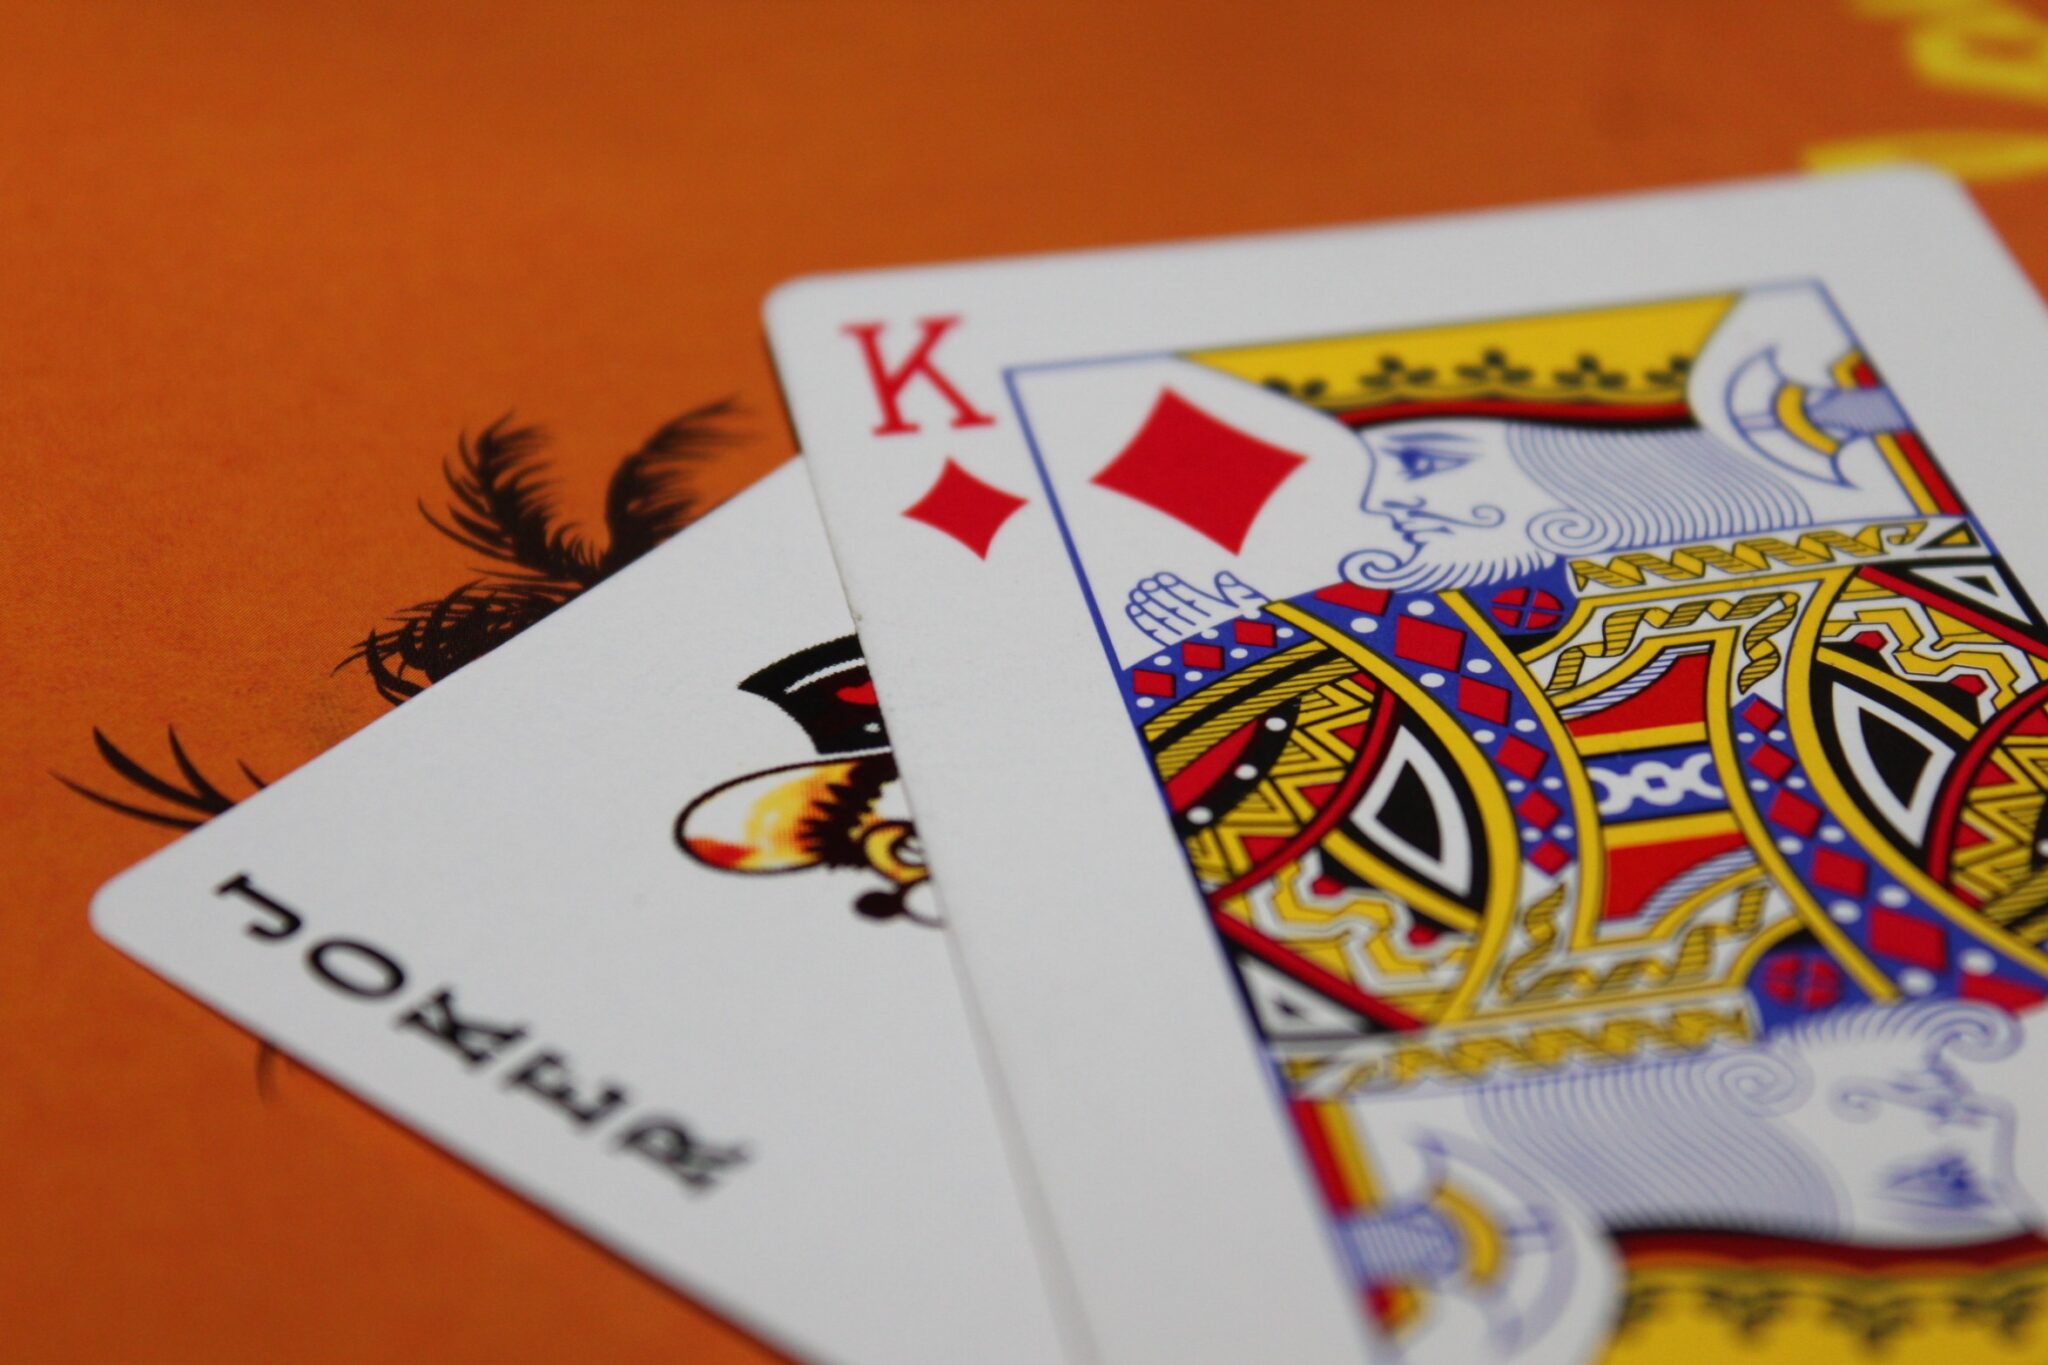 A close-up photo of playing cards on an orange surface, focusing on the king of diamonds card partially overlaid by another card in a betting system setup.